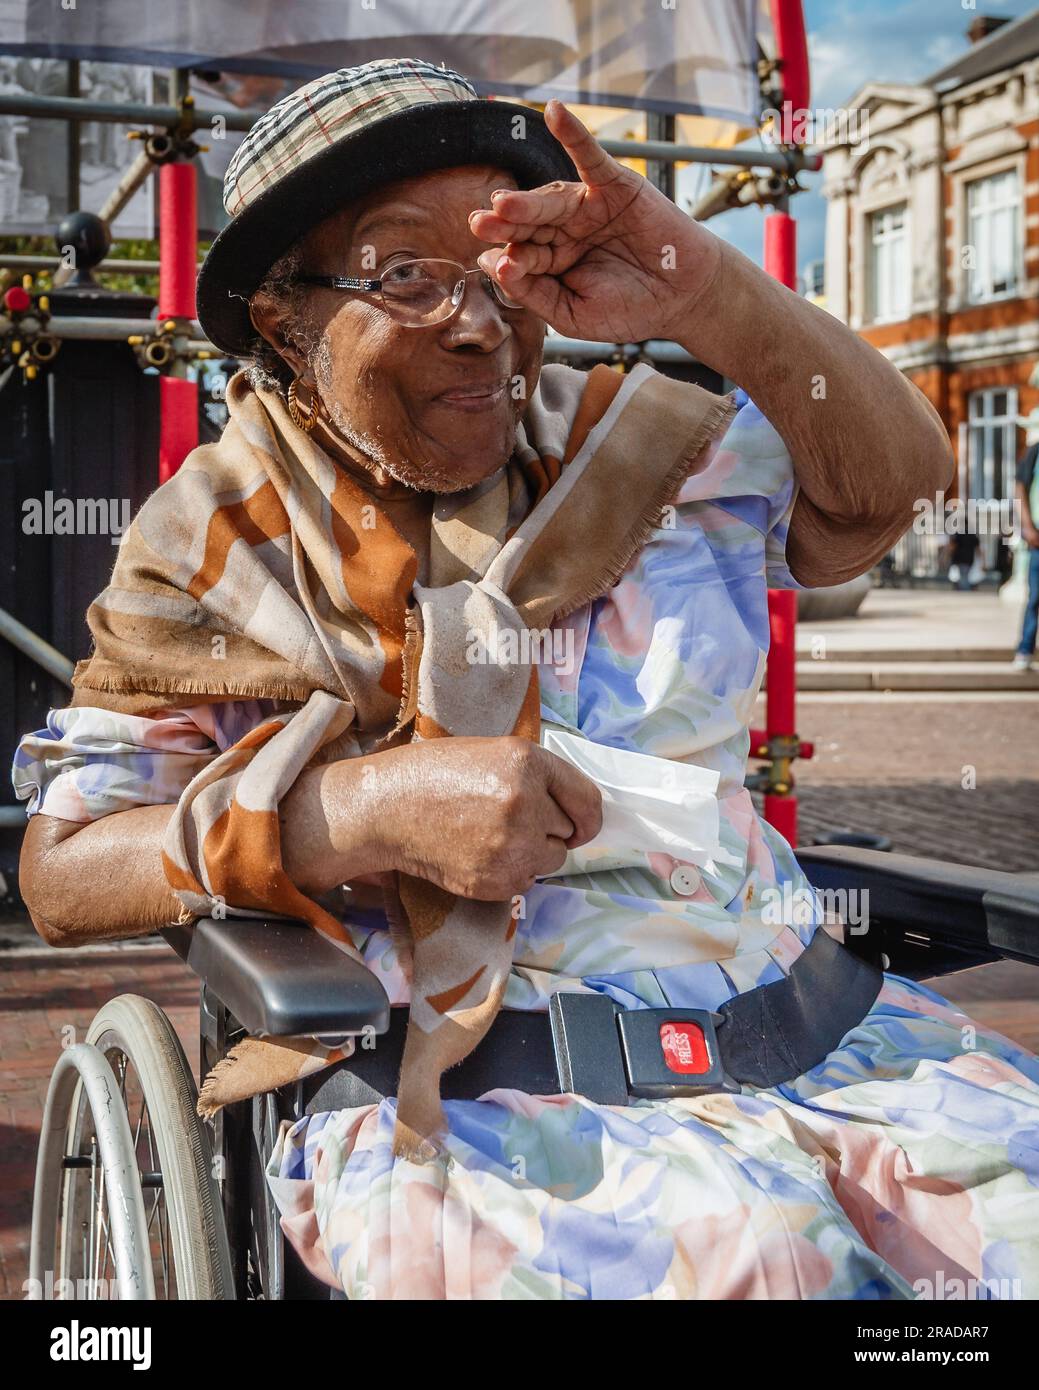 A nonagenarian windrush generation joins in the Windrush Day event in Brixton. Stock Photo